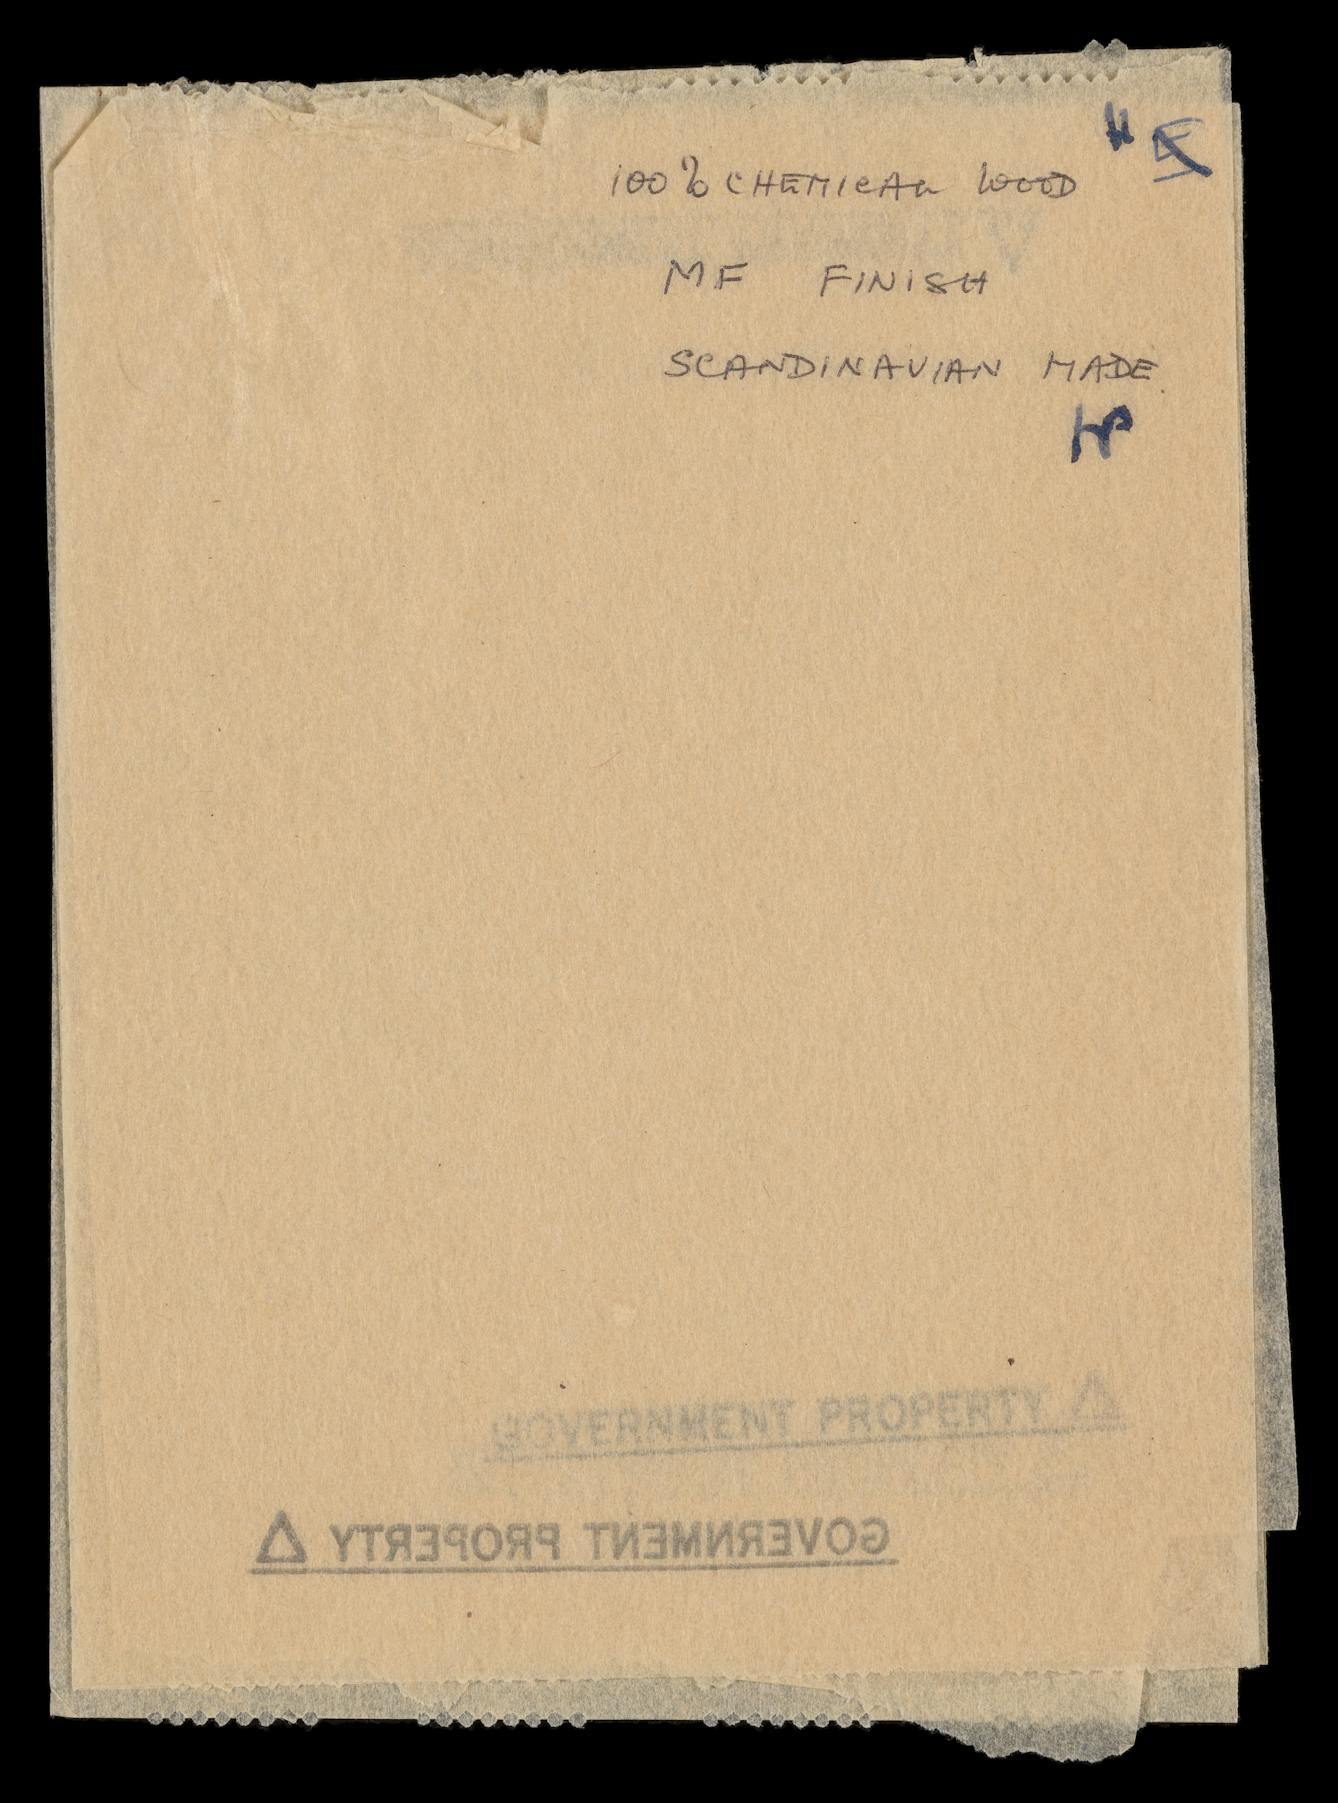 Photograph of a toilet paper sample sheet, bearing the hand written words "100% chemical wood, MG. Finish, Scandinavian made".